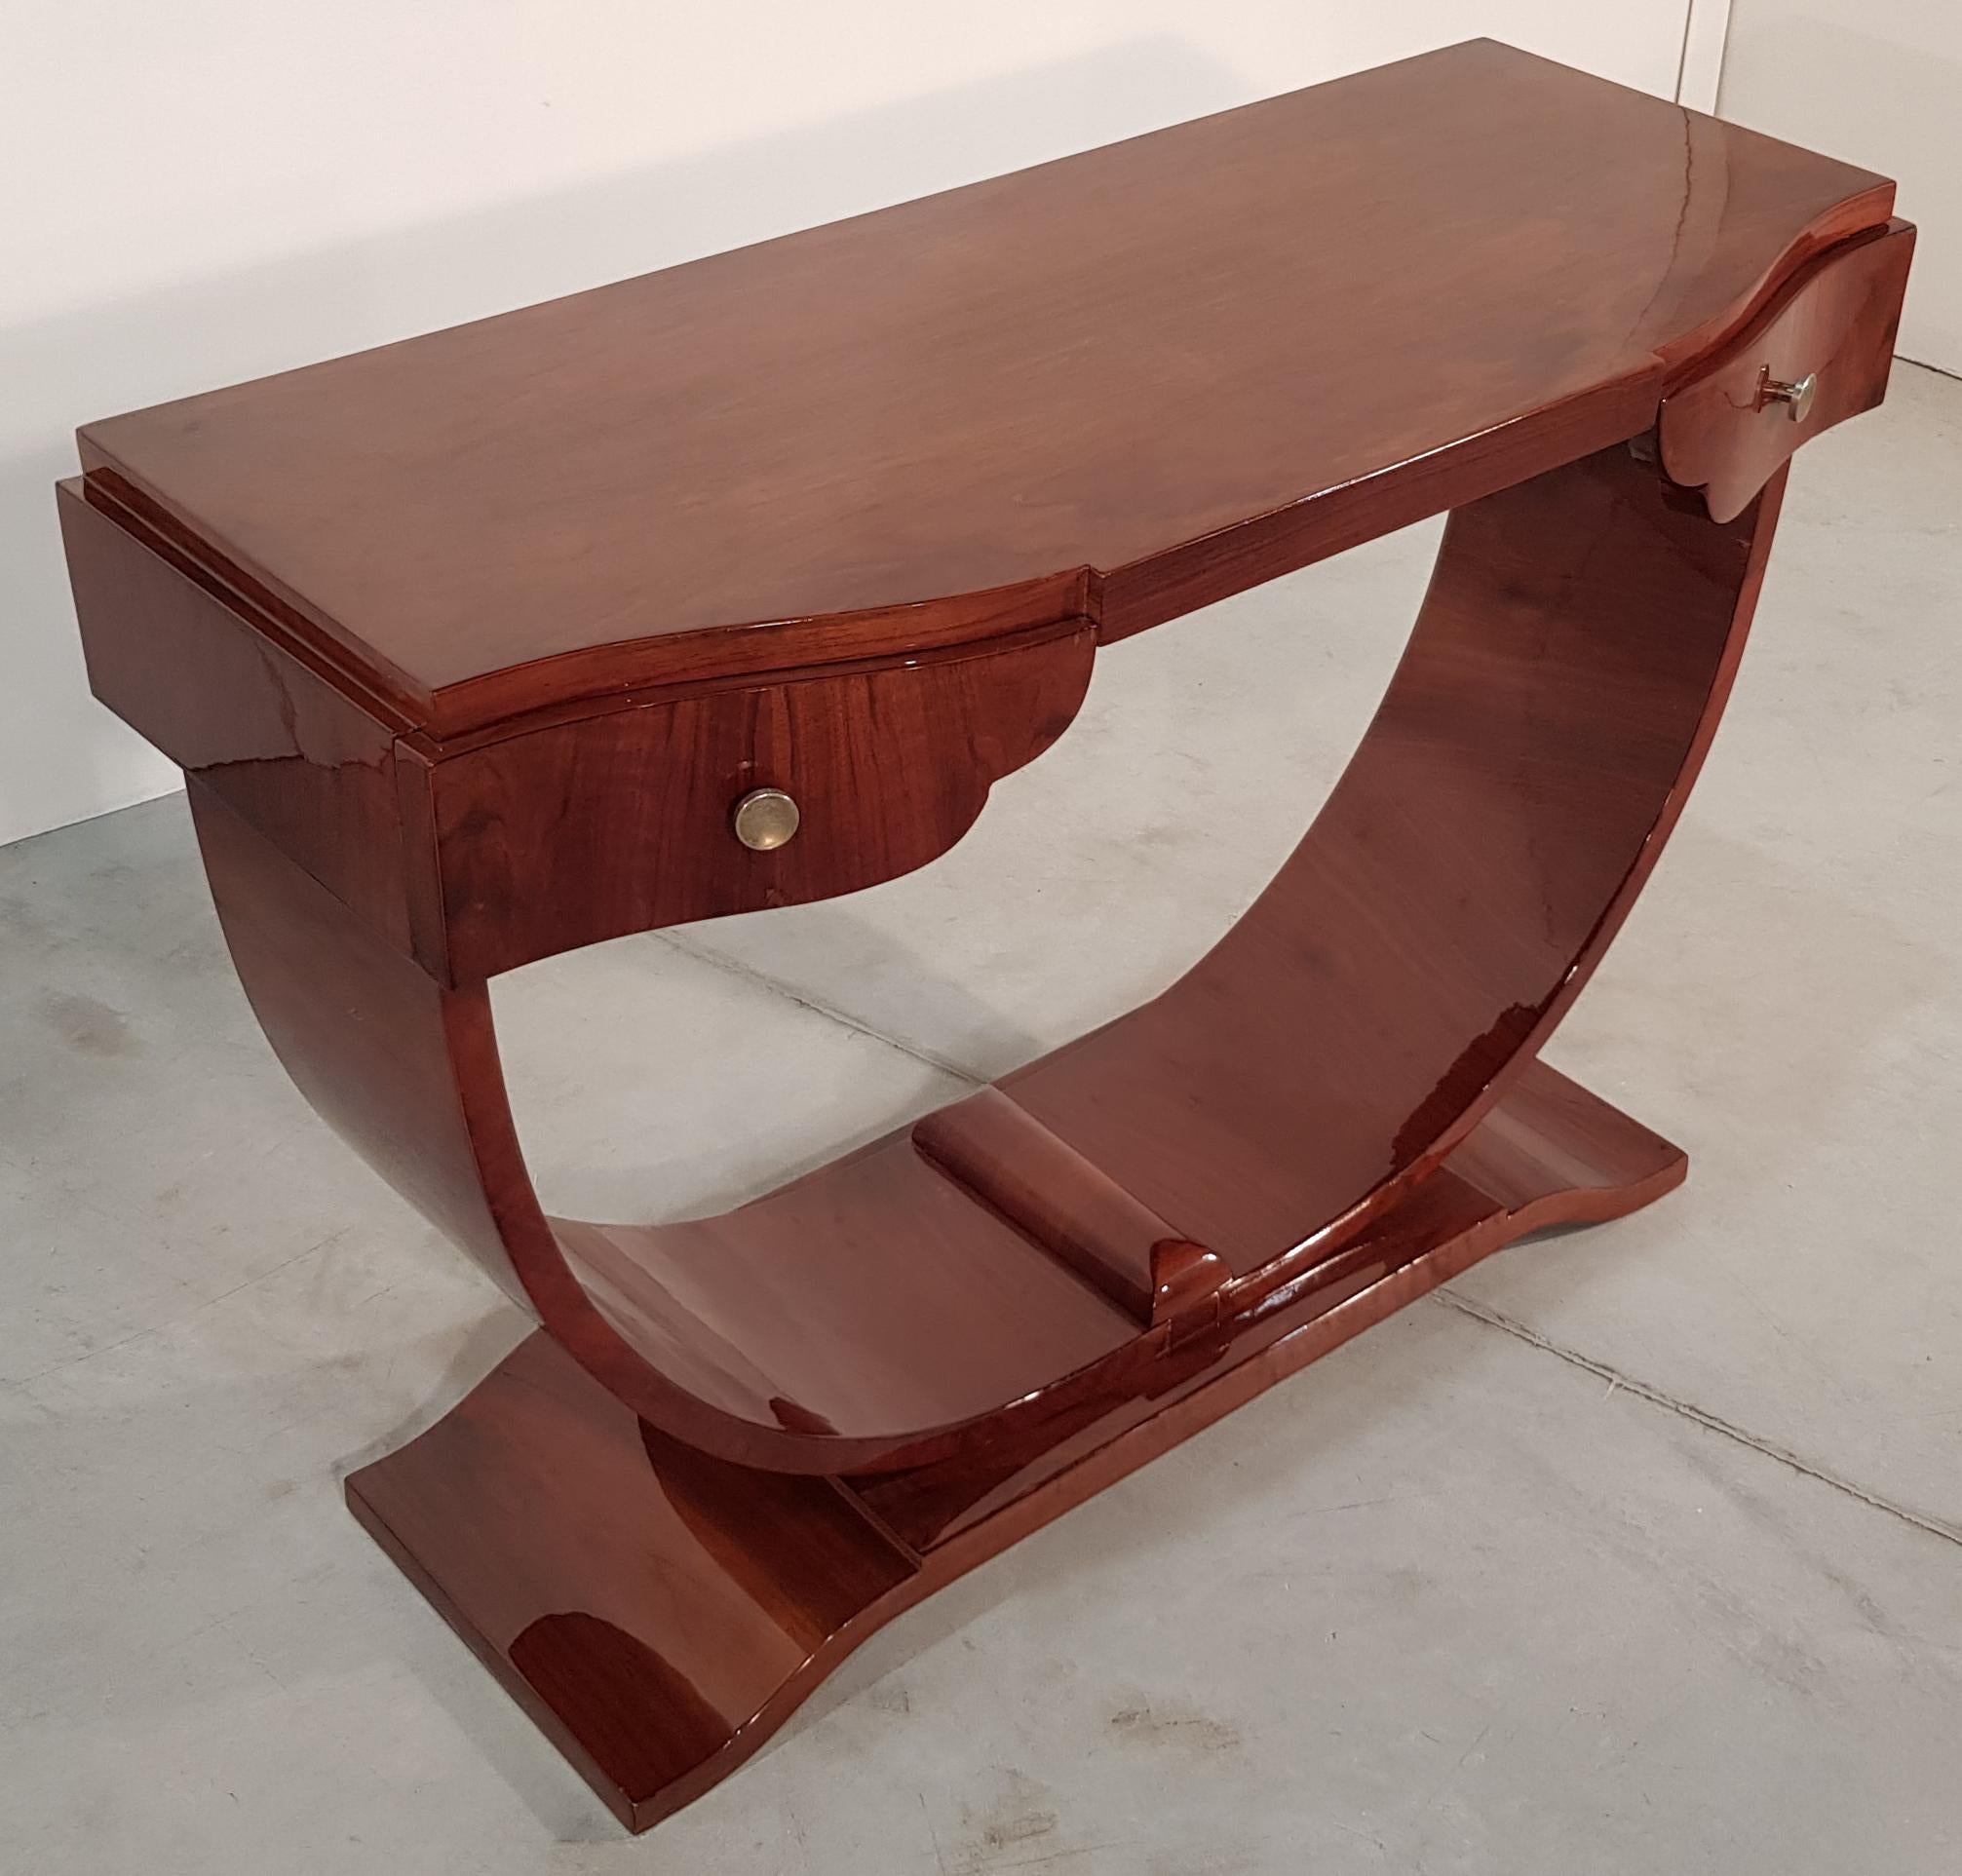 Mid-20th Century French Art Deco Walnut Console Table with Drawers, 1930s For Sale